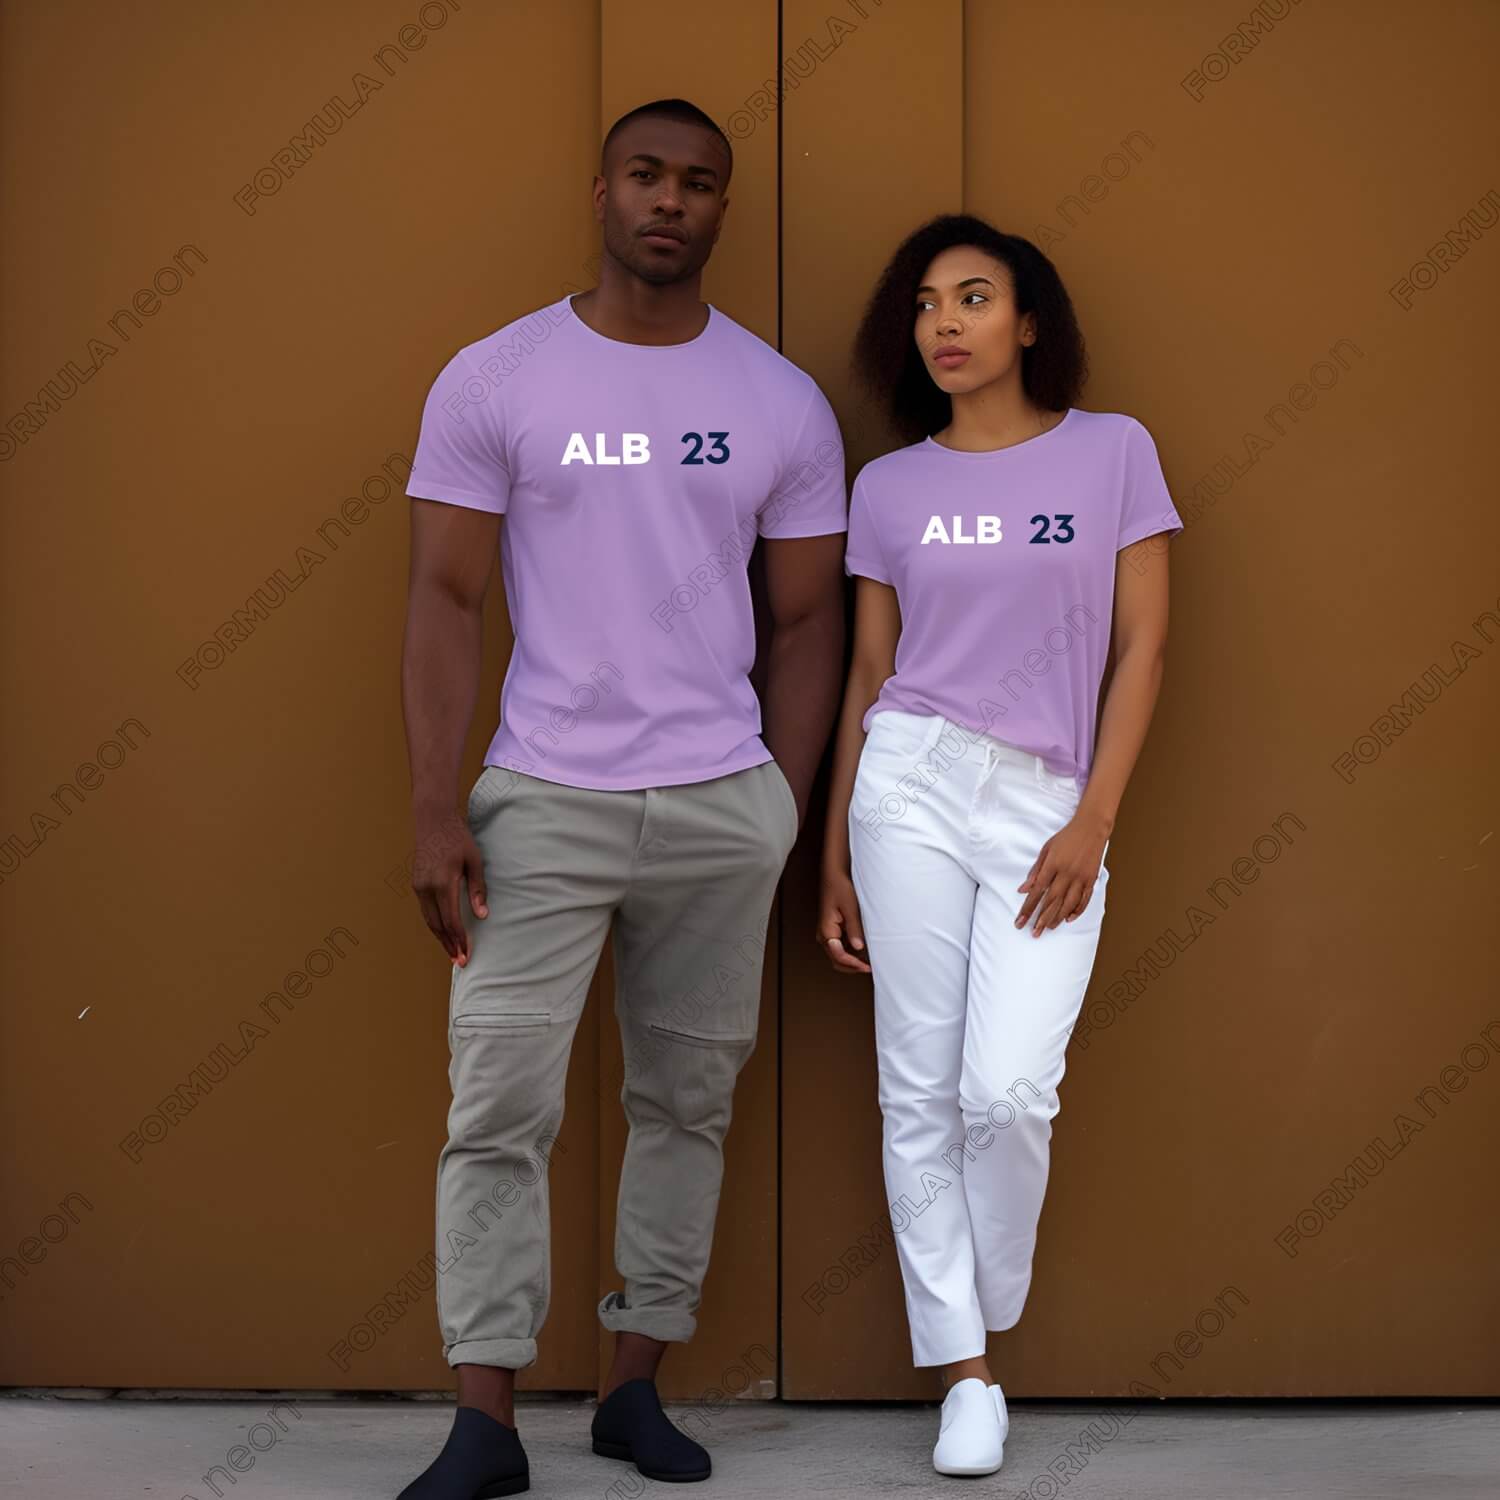 alb-tee-color-d5_||_Orchid